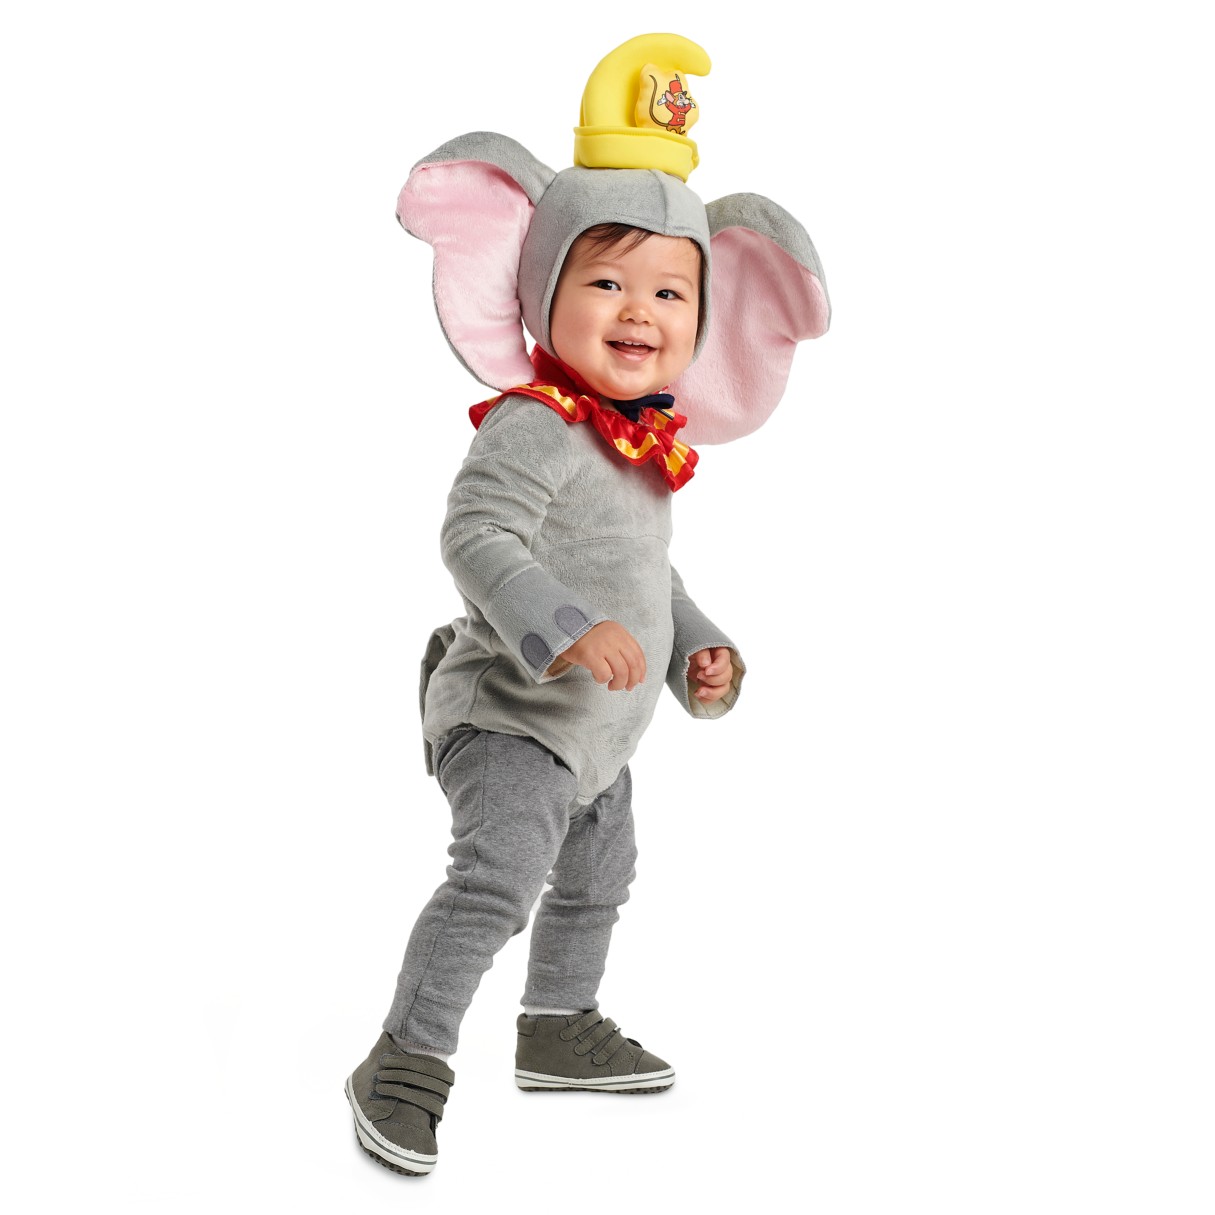 Dumbo Costume for Baby by Disguise